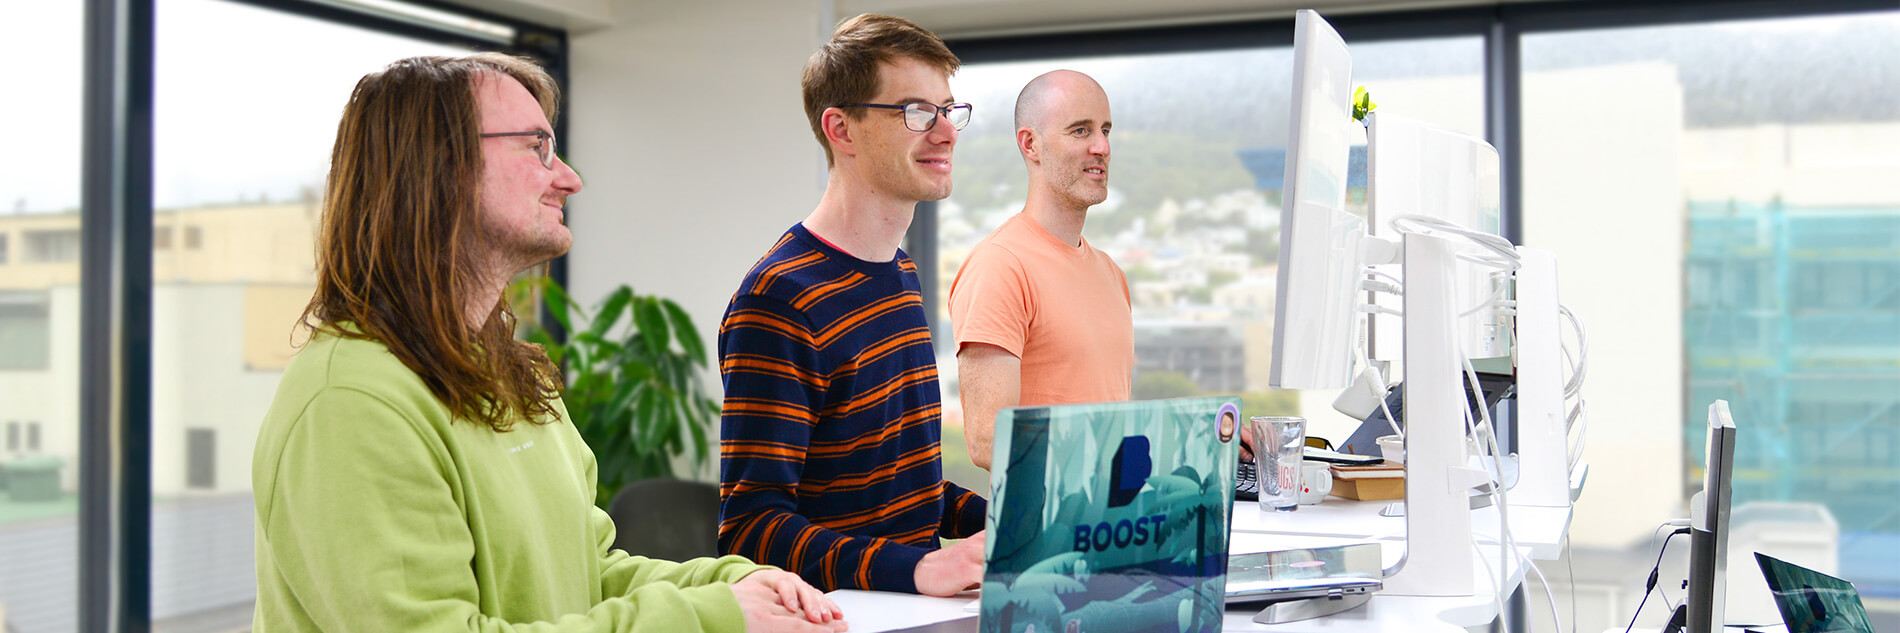 Three of the developers at Wellington mobile app development company Boost.